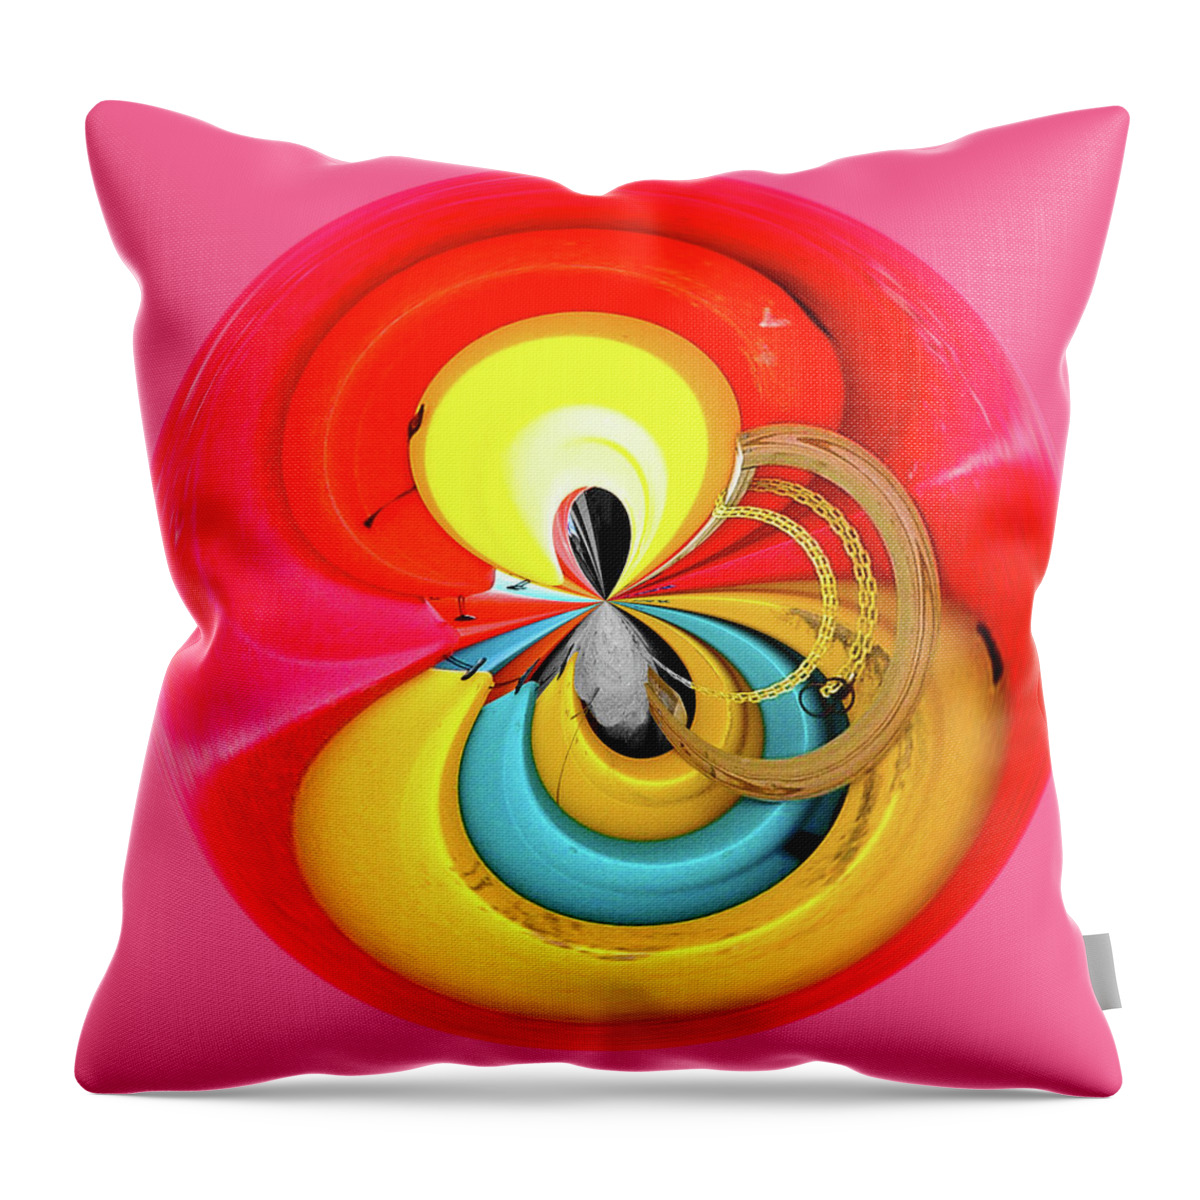 Red Throw Pillow featuring the photograph Kayaks Orb by Bill Barber